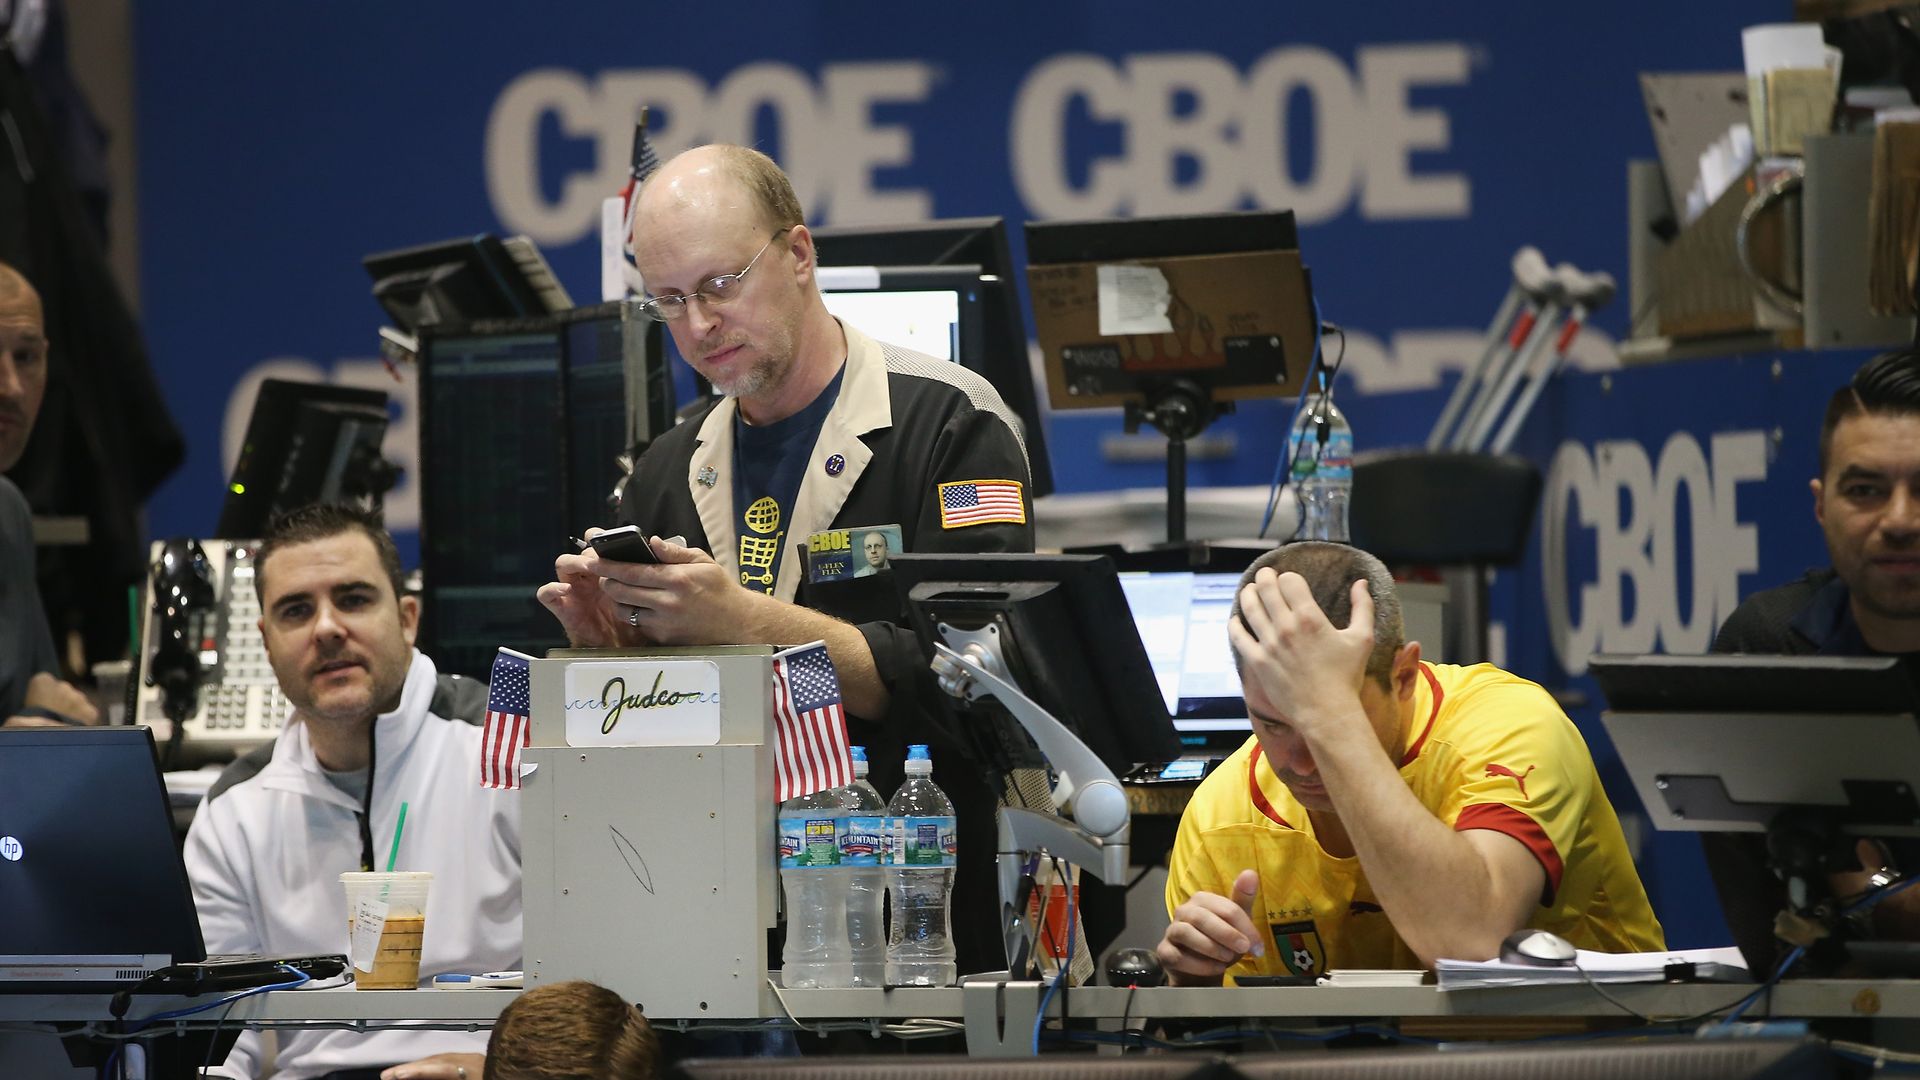 In this image, two men sit behind computers on a trading floor and one man stands between them, looking at his phone.